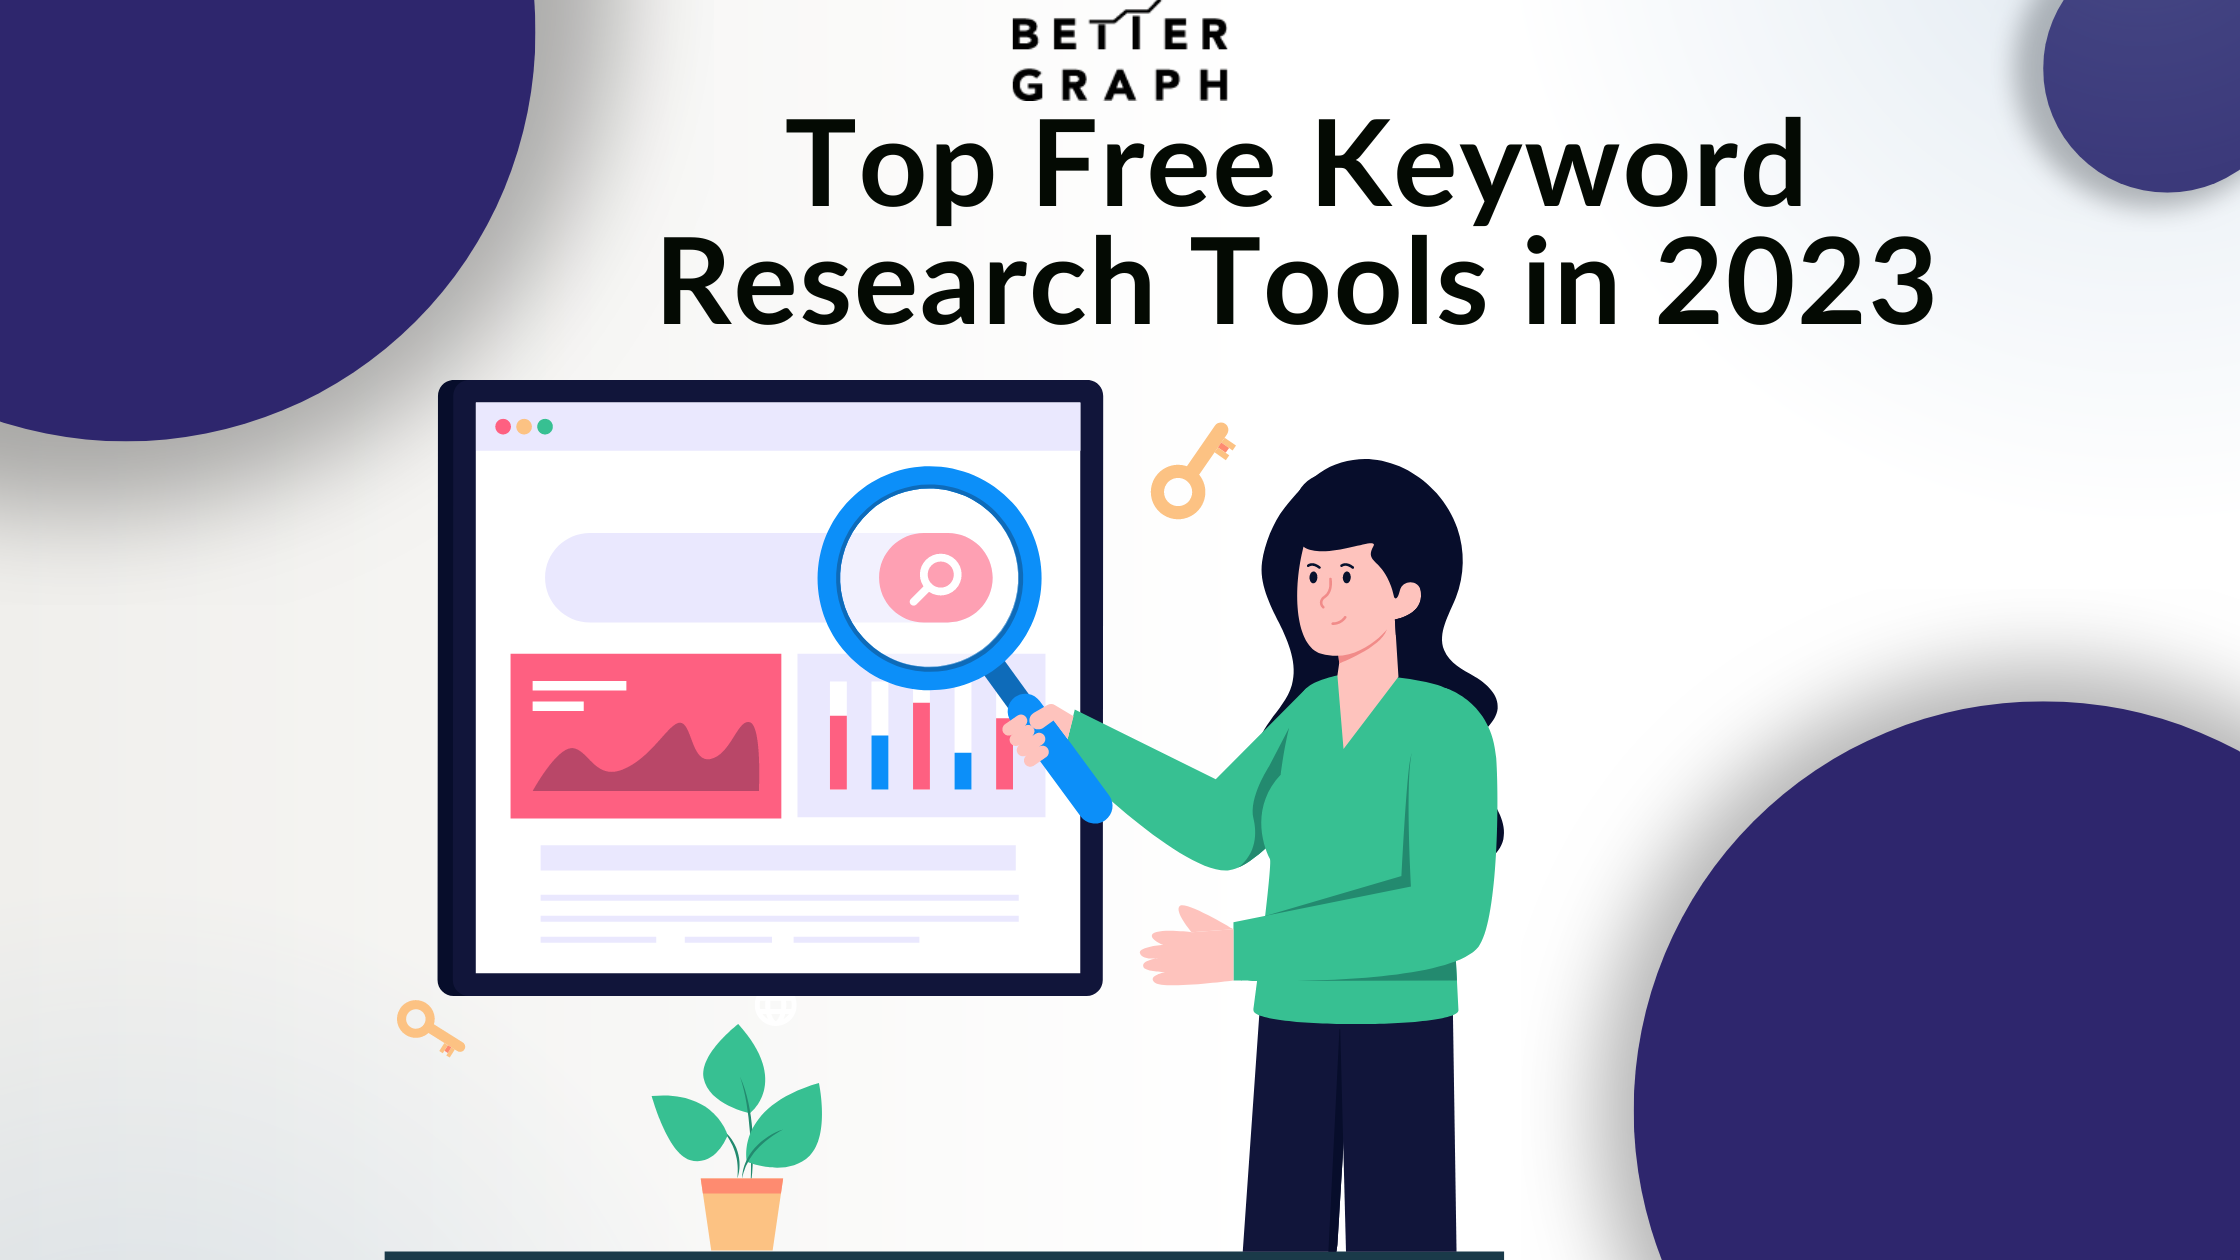 Top Free Keyword Research Tools in 2023 (2).png  by BetterGraph